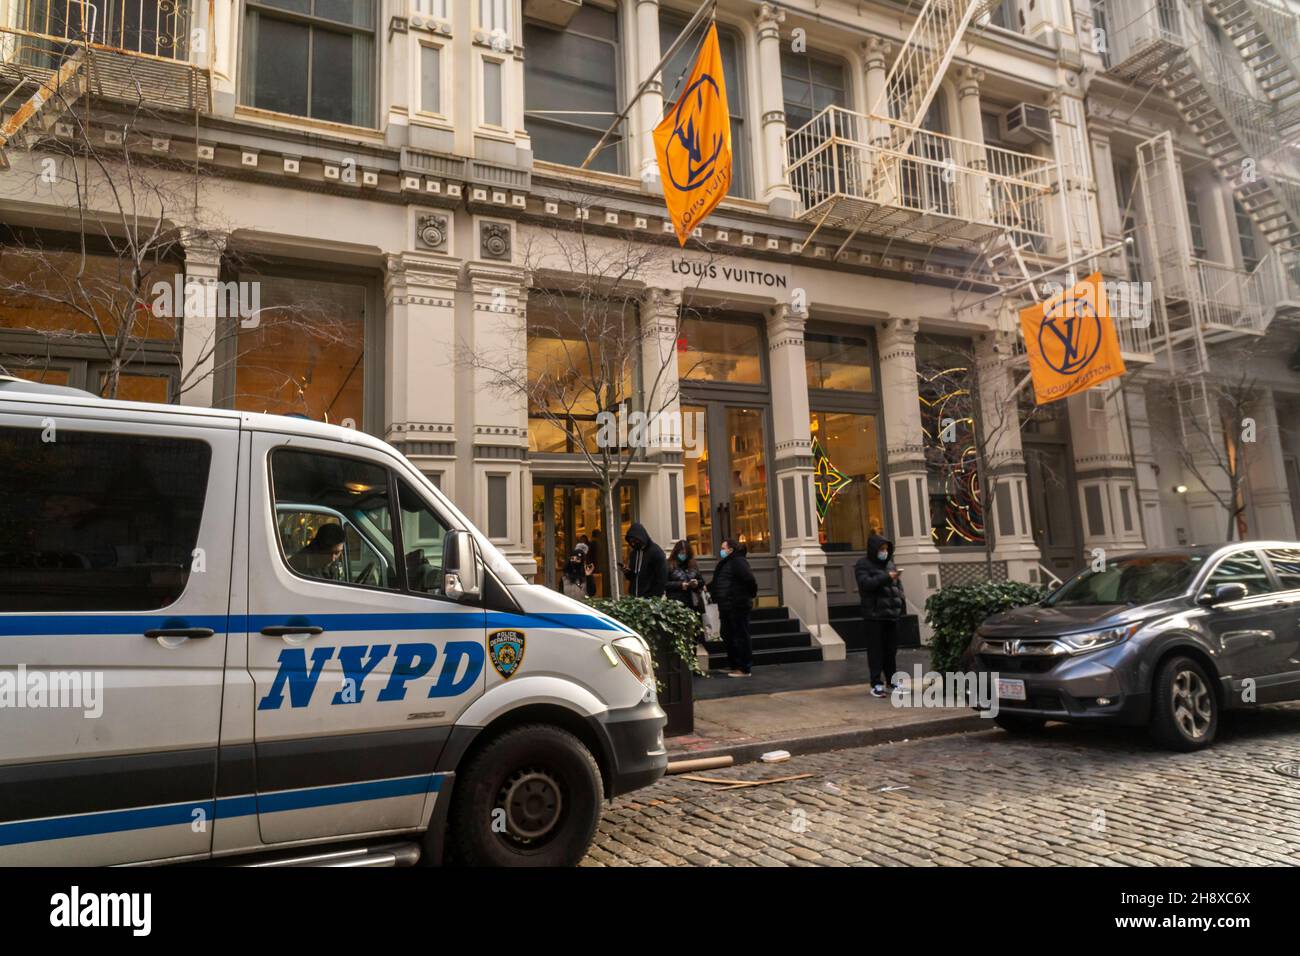 Police in front of the Louis Vuitton store in the Soho neighborhood of New York on Saturday, November 27, 2021 during the Black Friday weekend. The police presence was noticeable as the NYPD pro-actively prevented a smash and grab problem that effected San Francisco. (© Richard B. Levine) Stock Photo